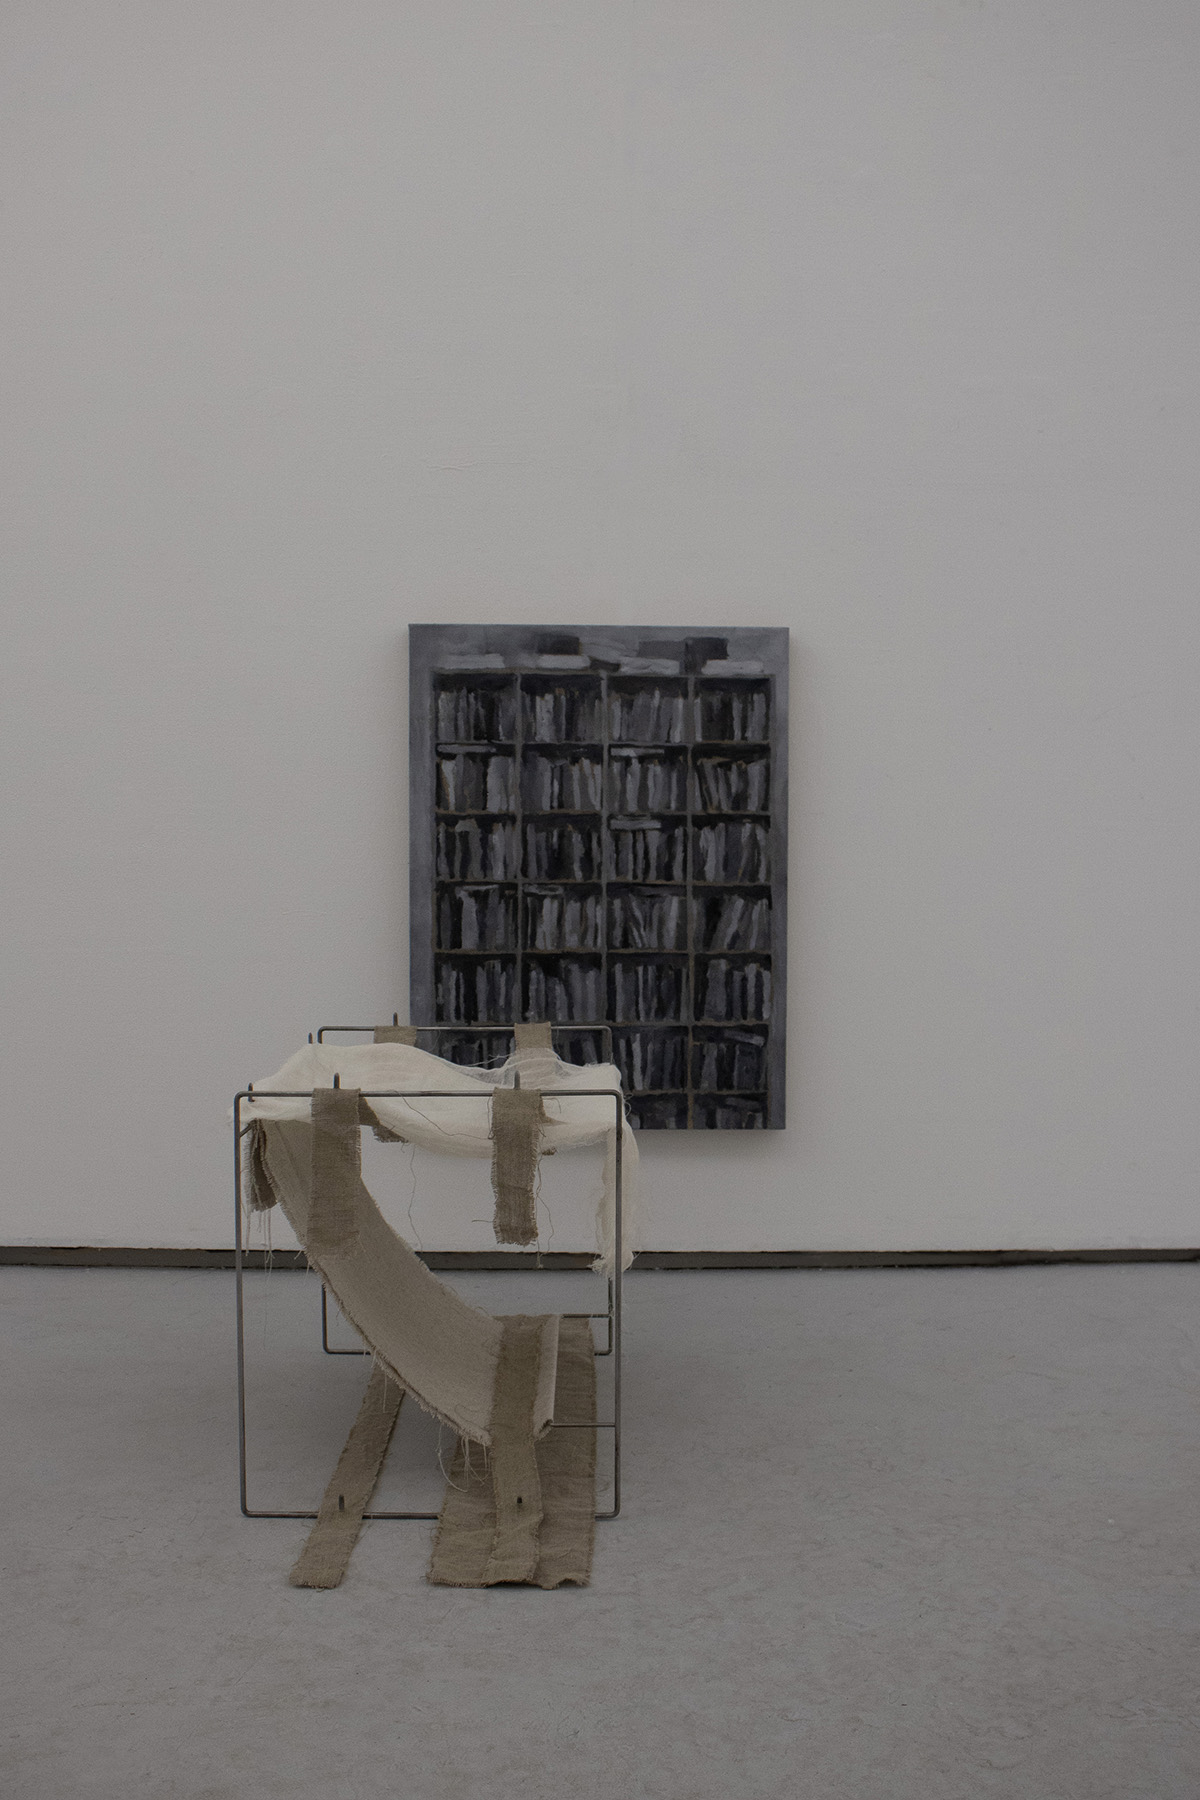 An image of an abstract sculpture in front of a grey painting of books on a bookshelf.